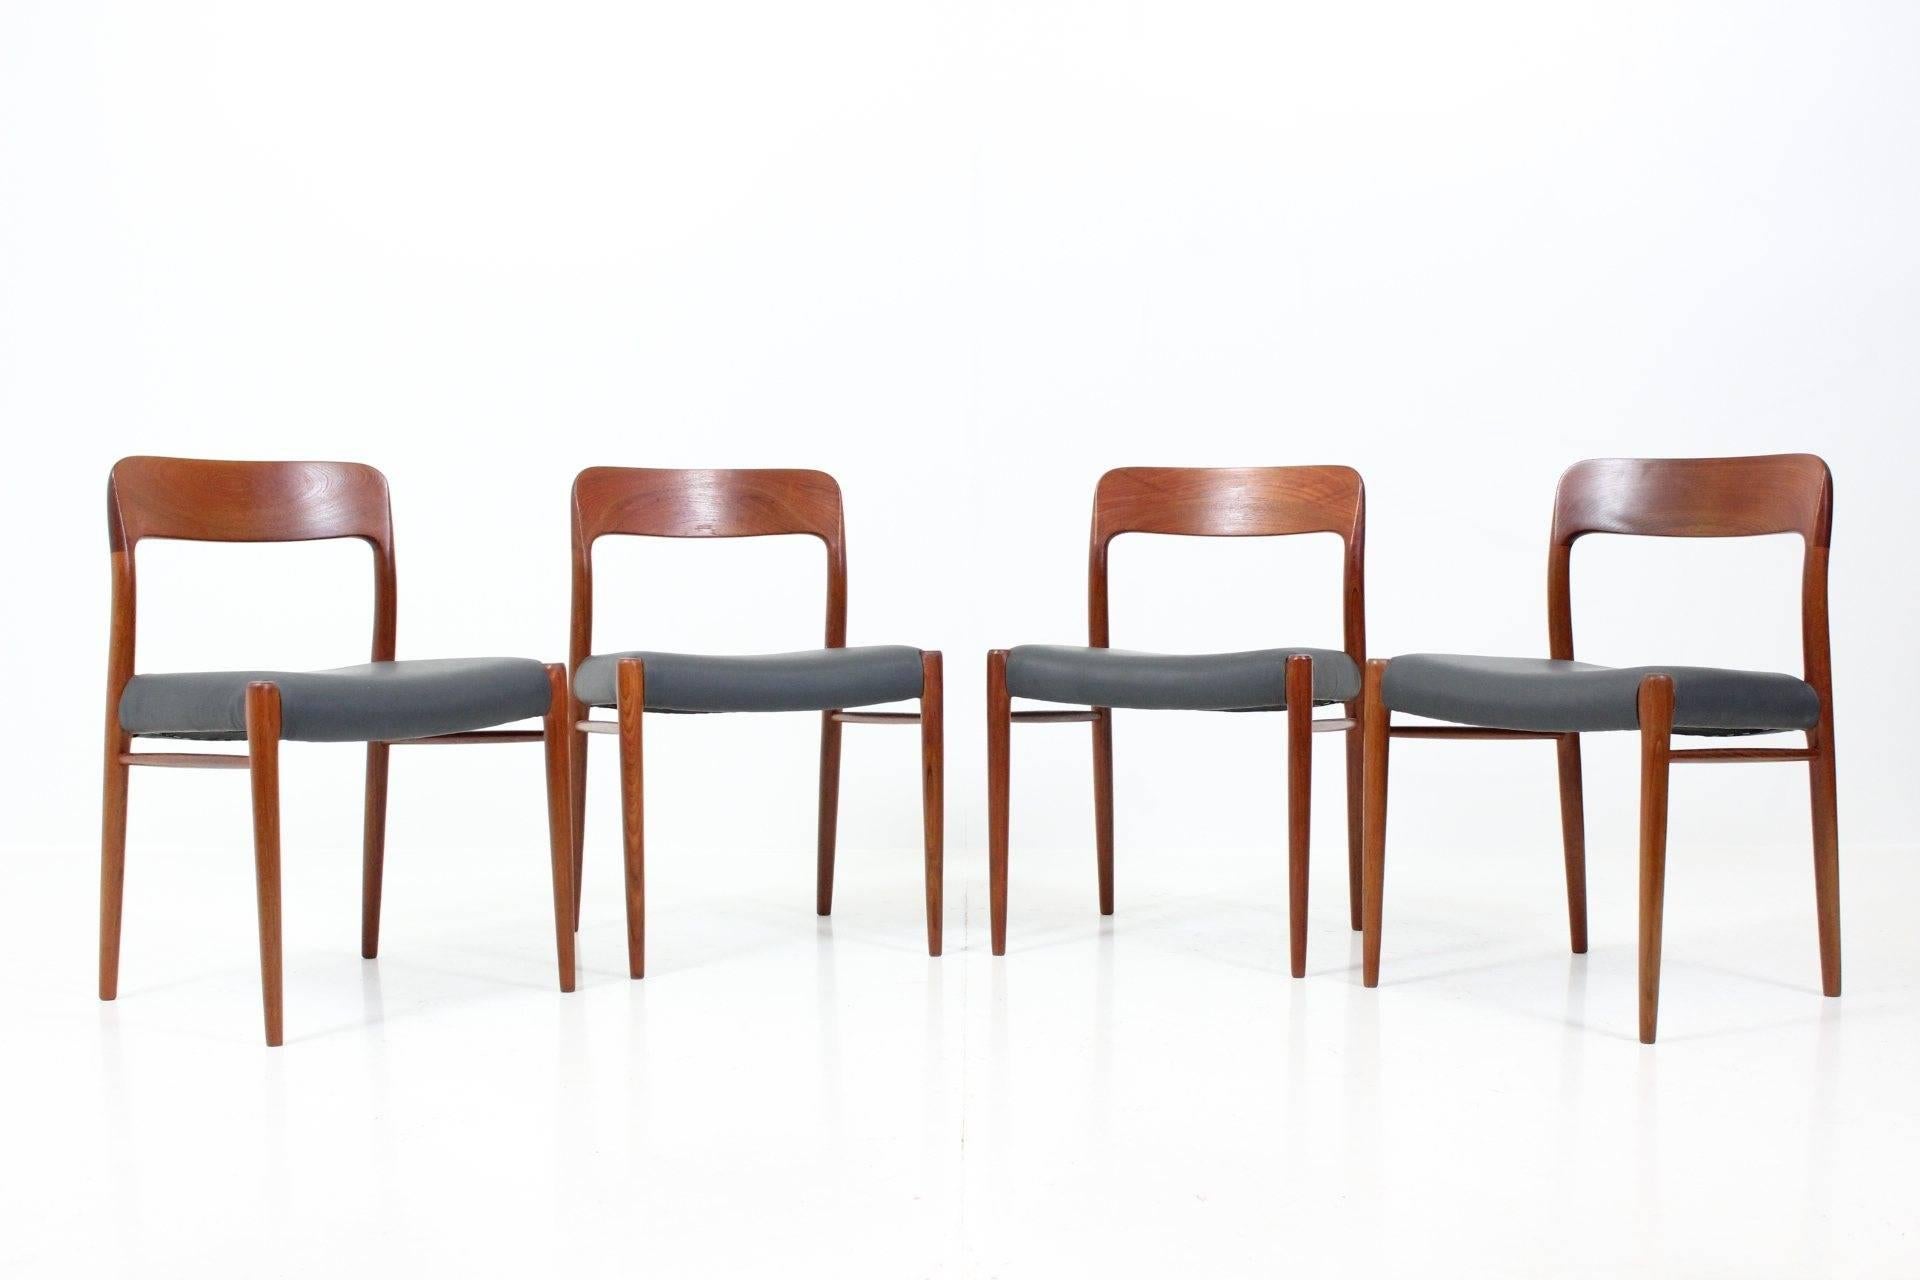 Set of four dining chairs in solid teak by Niels Otto Møller for J.L. Møllers Møbelfabrik featuring organic shaped back. The chairs have been carefully restored and have updated anthracite grey leather upholstery.